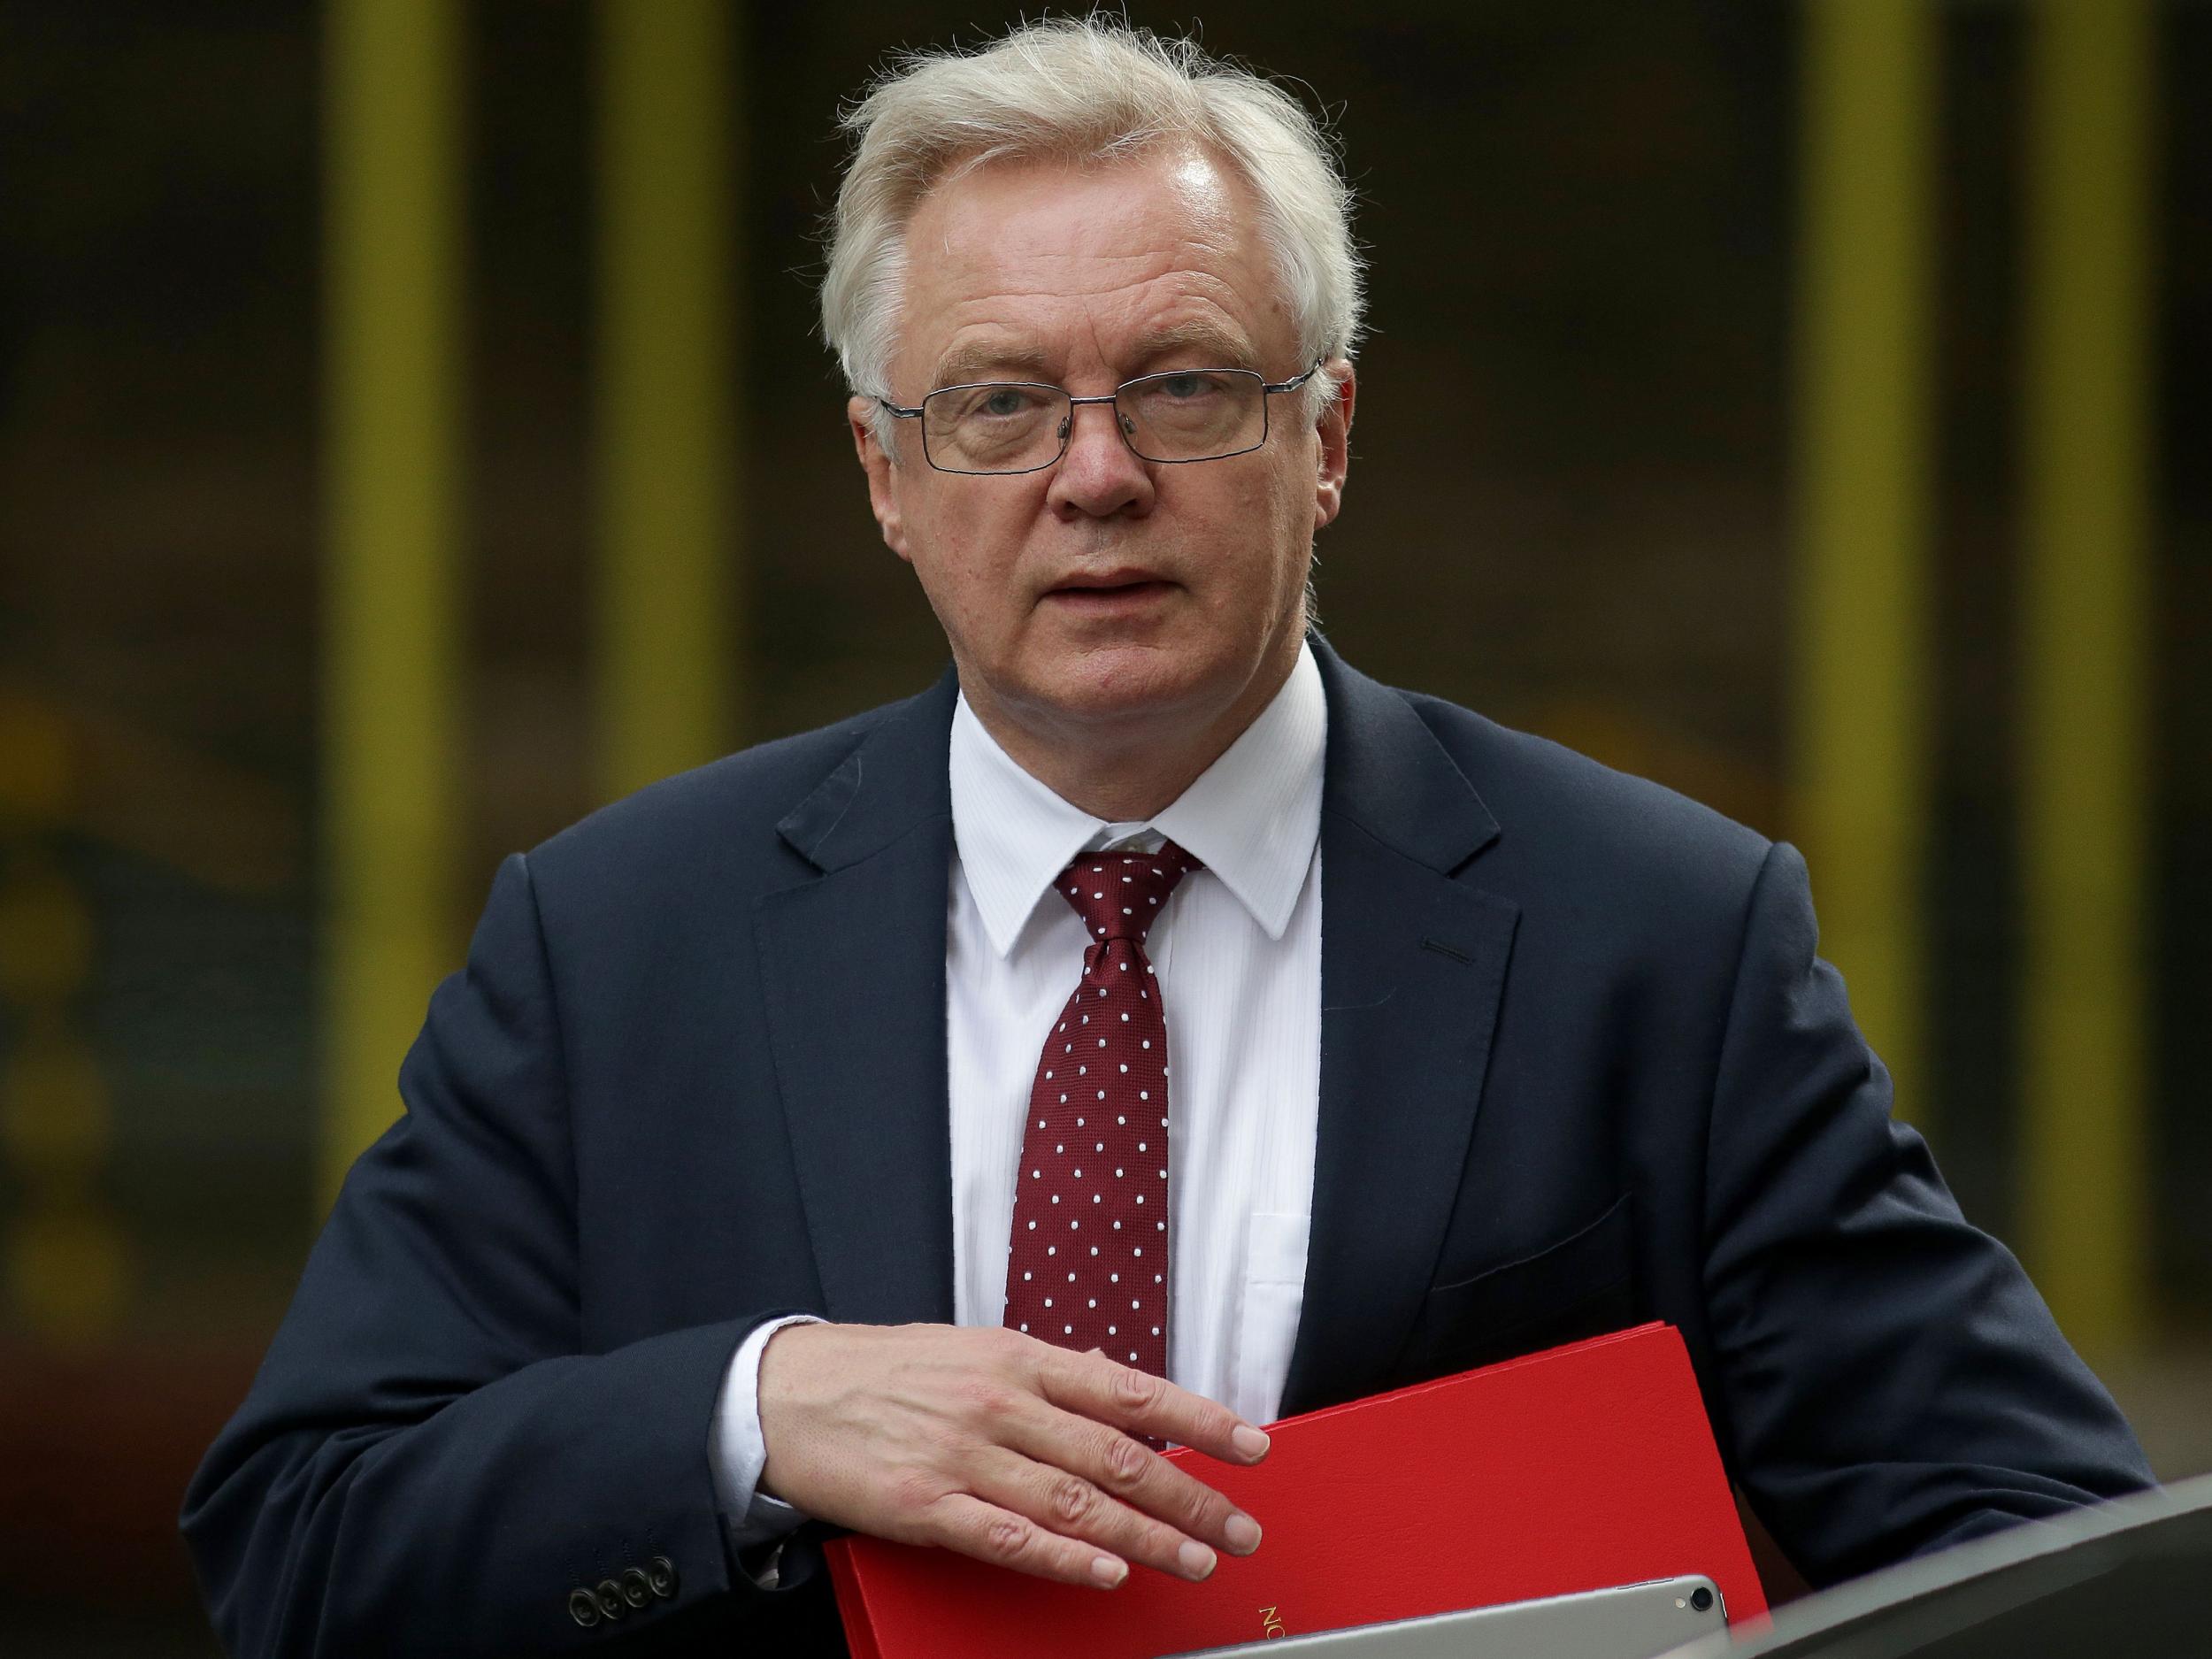 Brexit Secretary David Davis introduced the EU Withdrawal Bill in the Commons